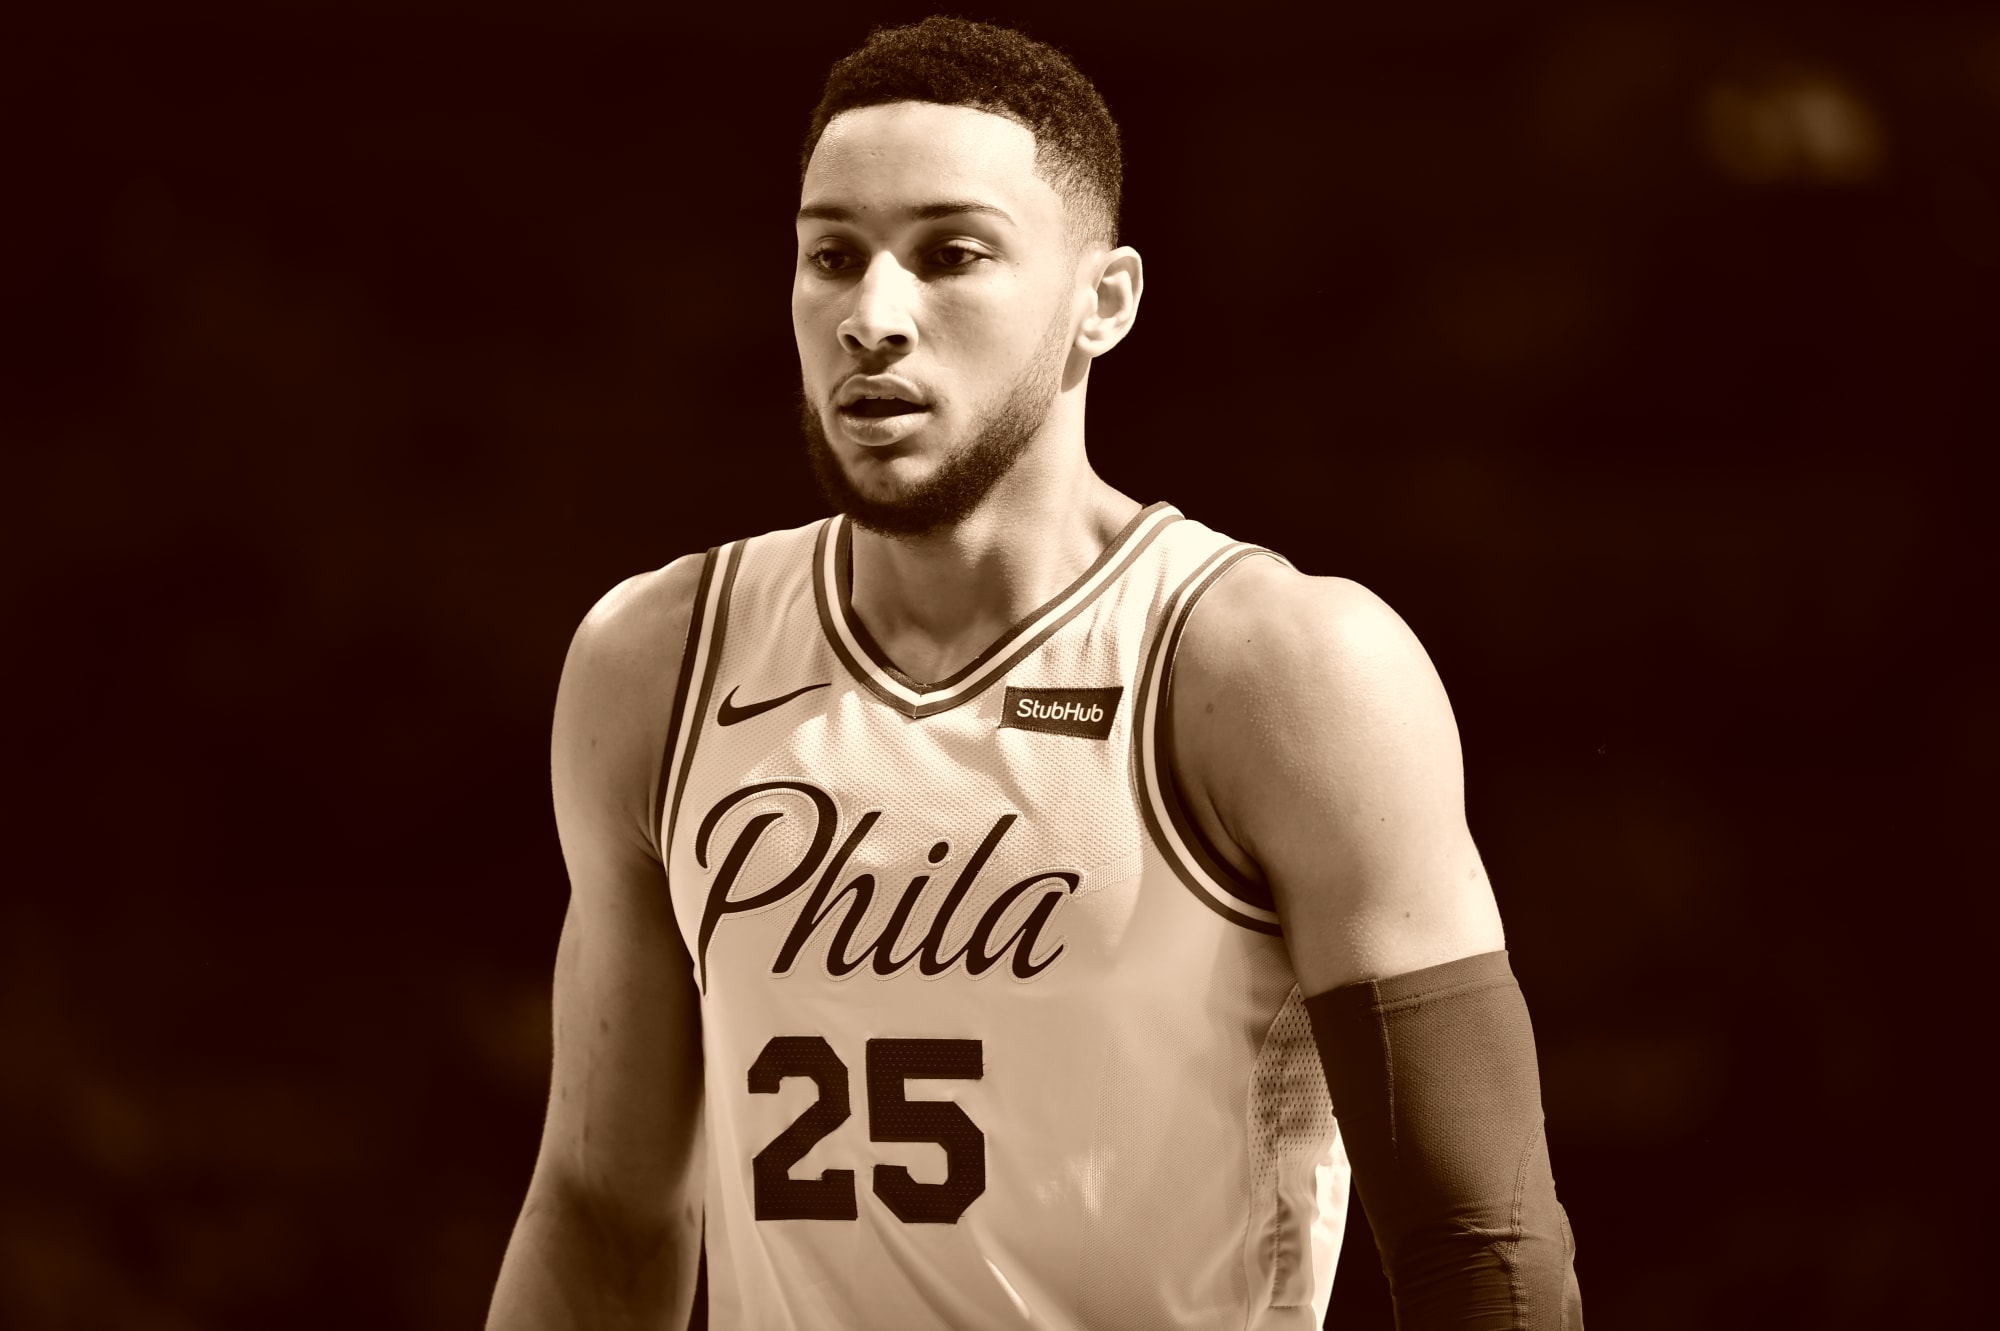 Philadelphia 76ers: The City Edition jerseys are a dangerous game